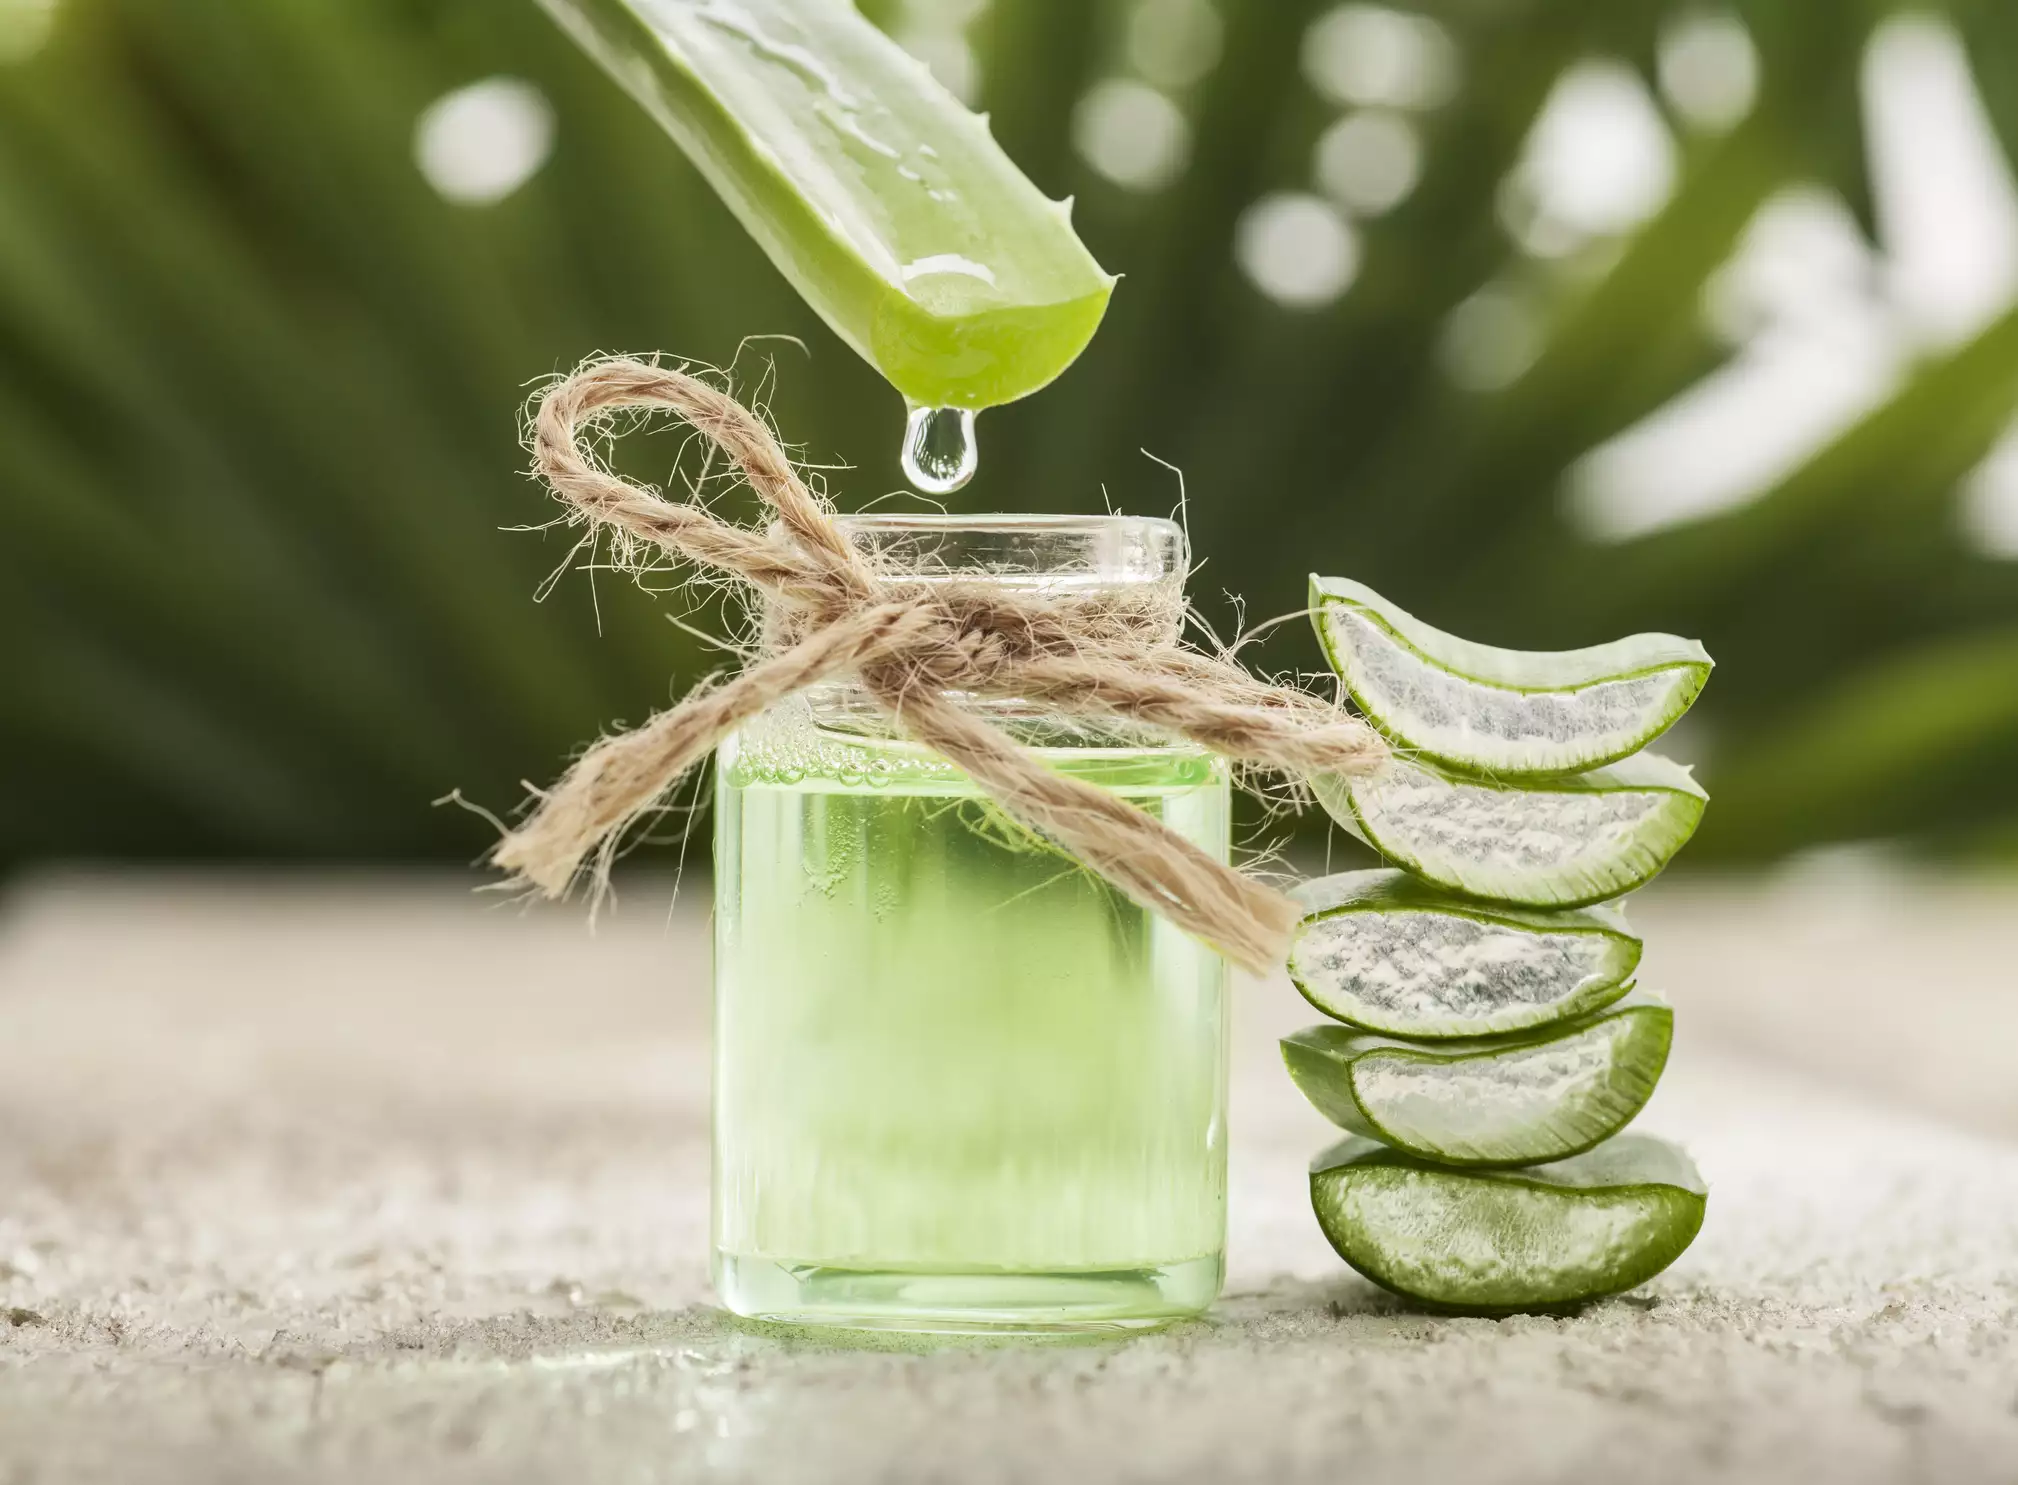 Aloe Vera leaves and juice with a tropical blurred background